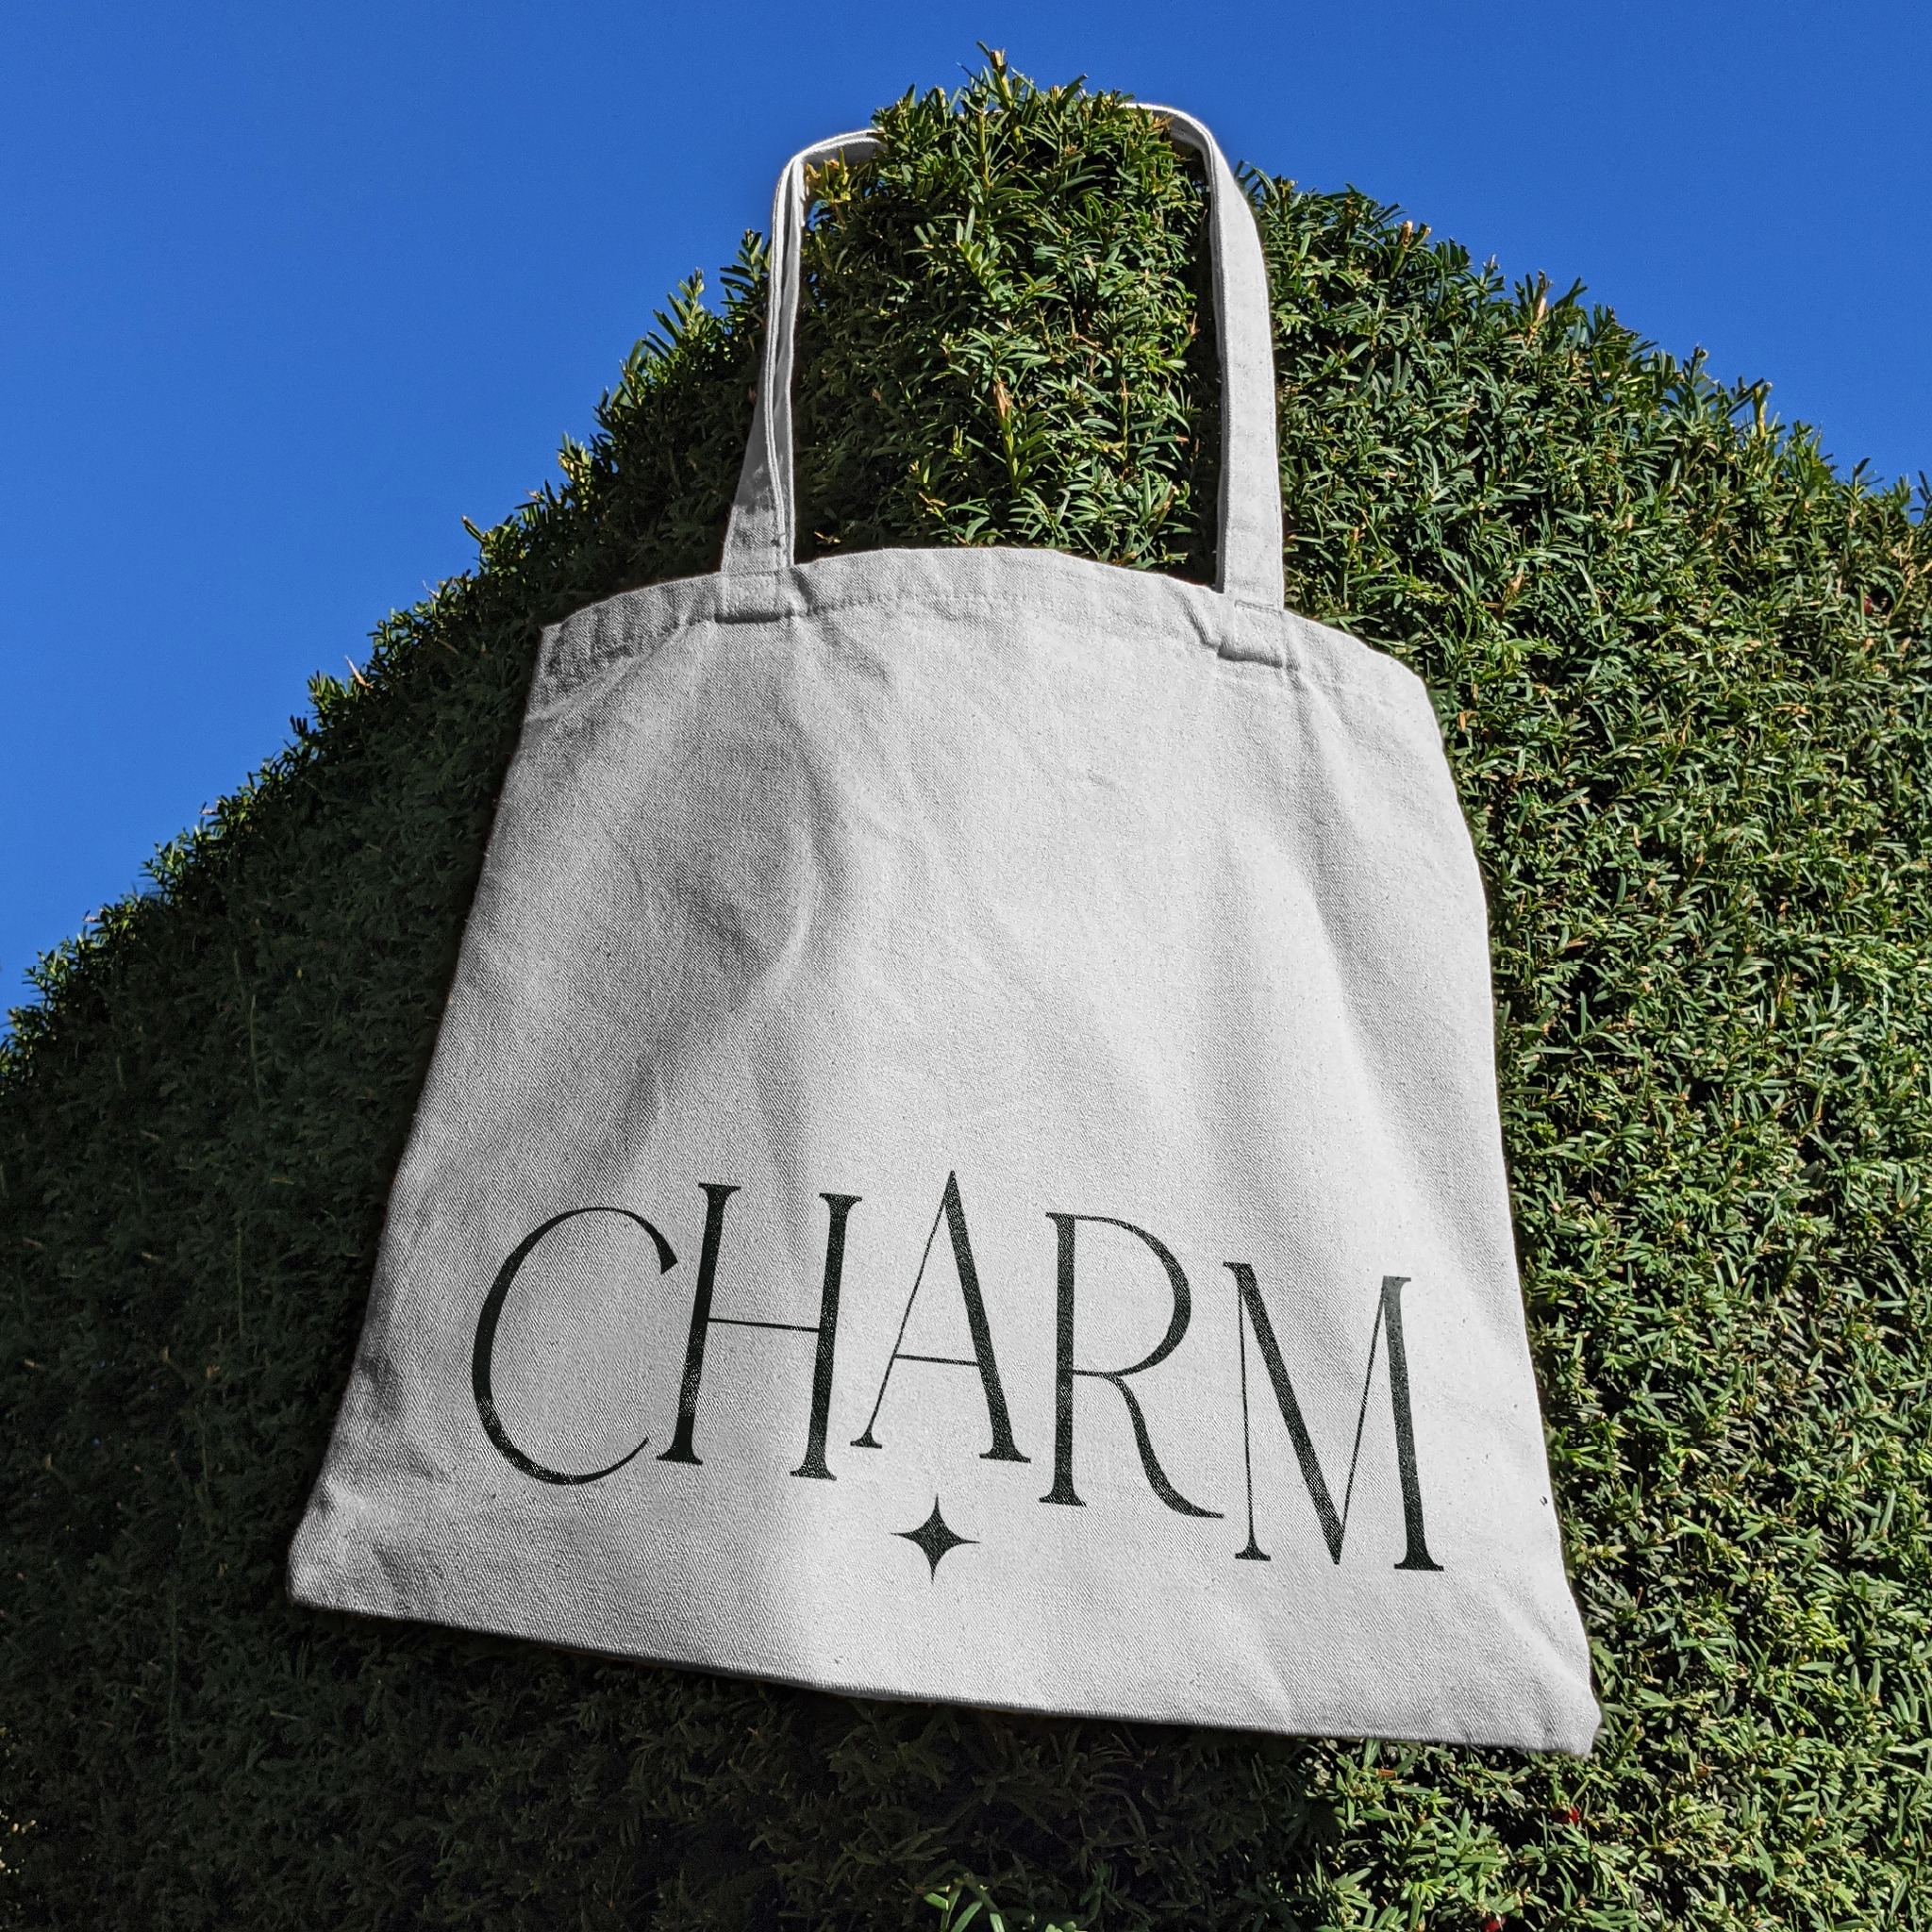 Introducing Charm✨ -Traditional & Natural Tea 

When I hear the word "charm" the first thing that comes to mind is stars